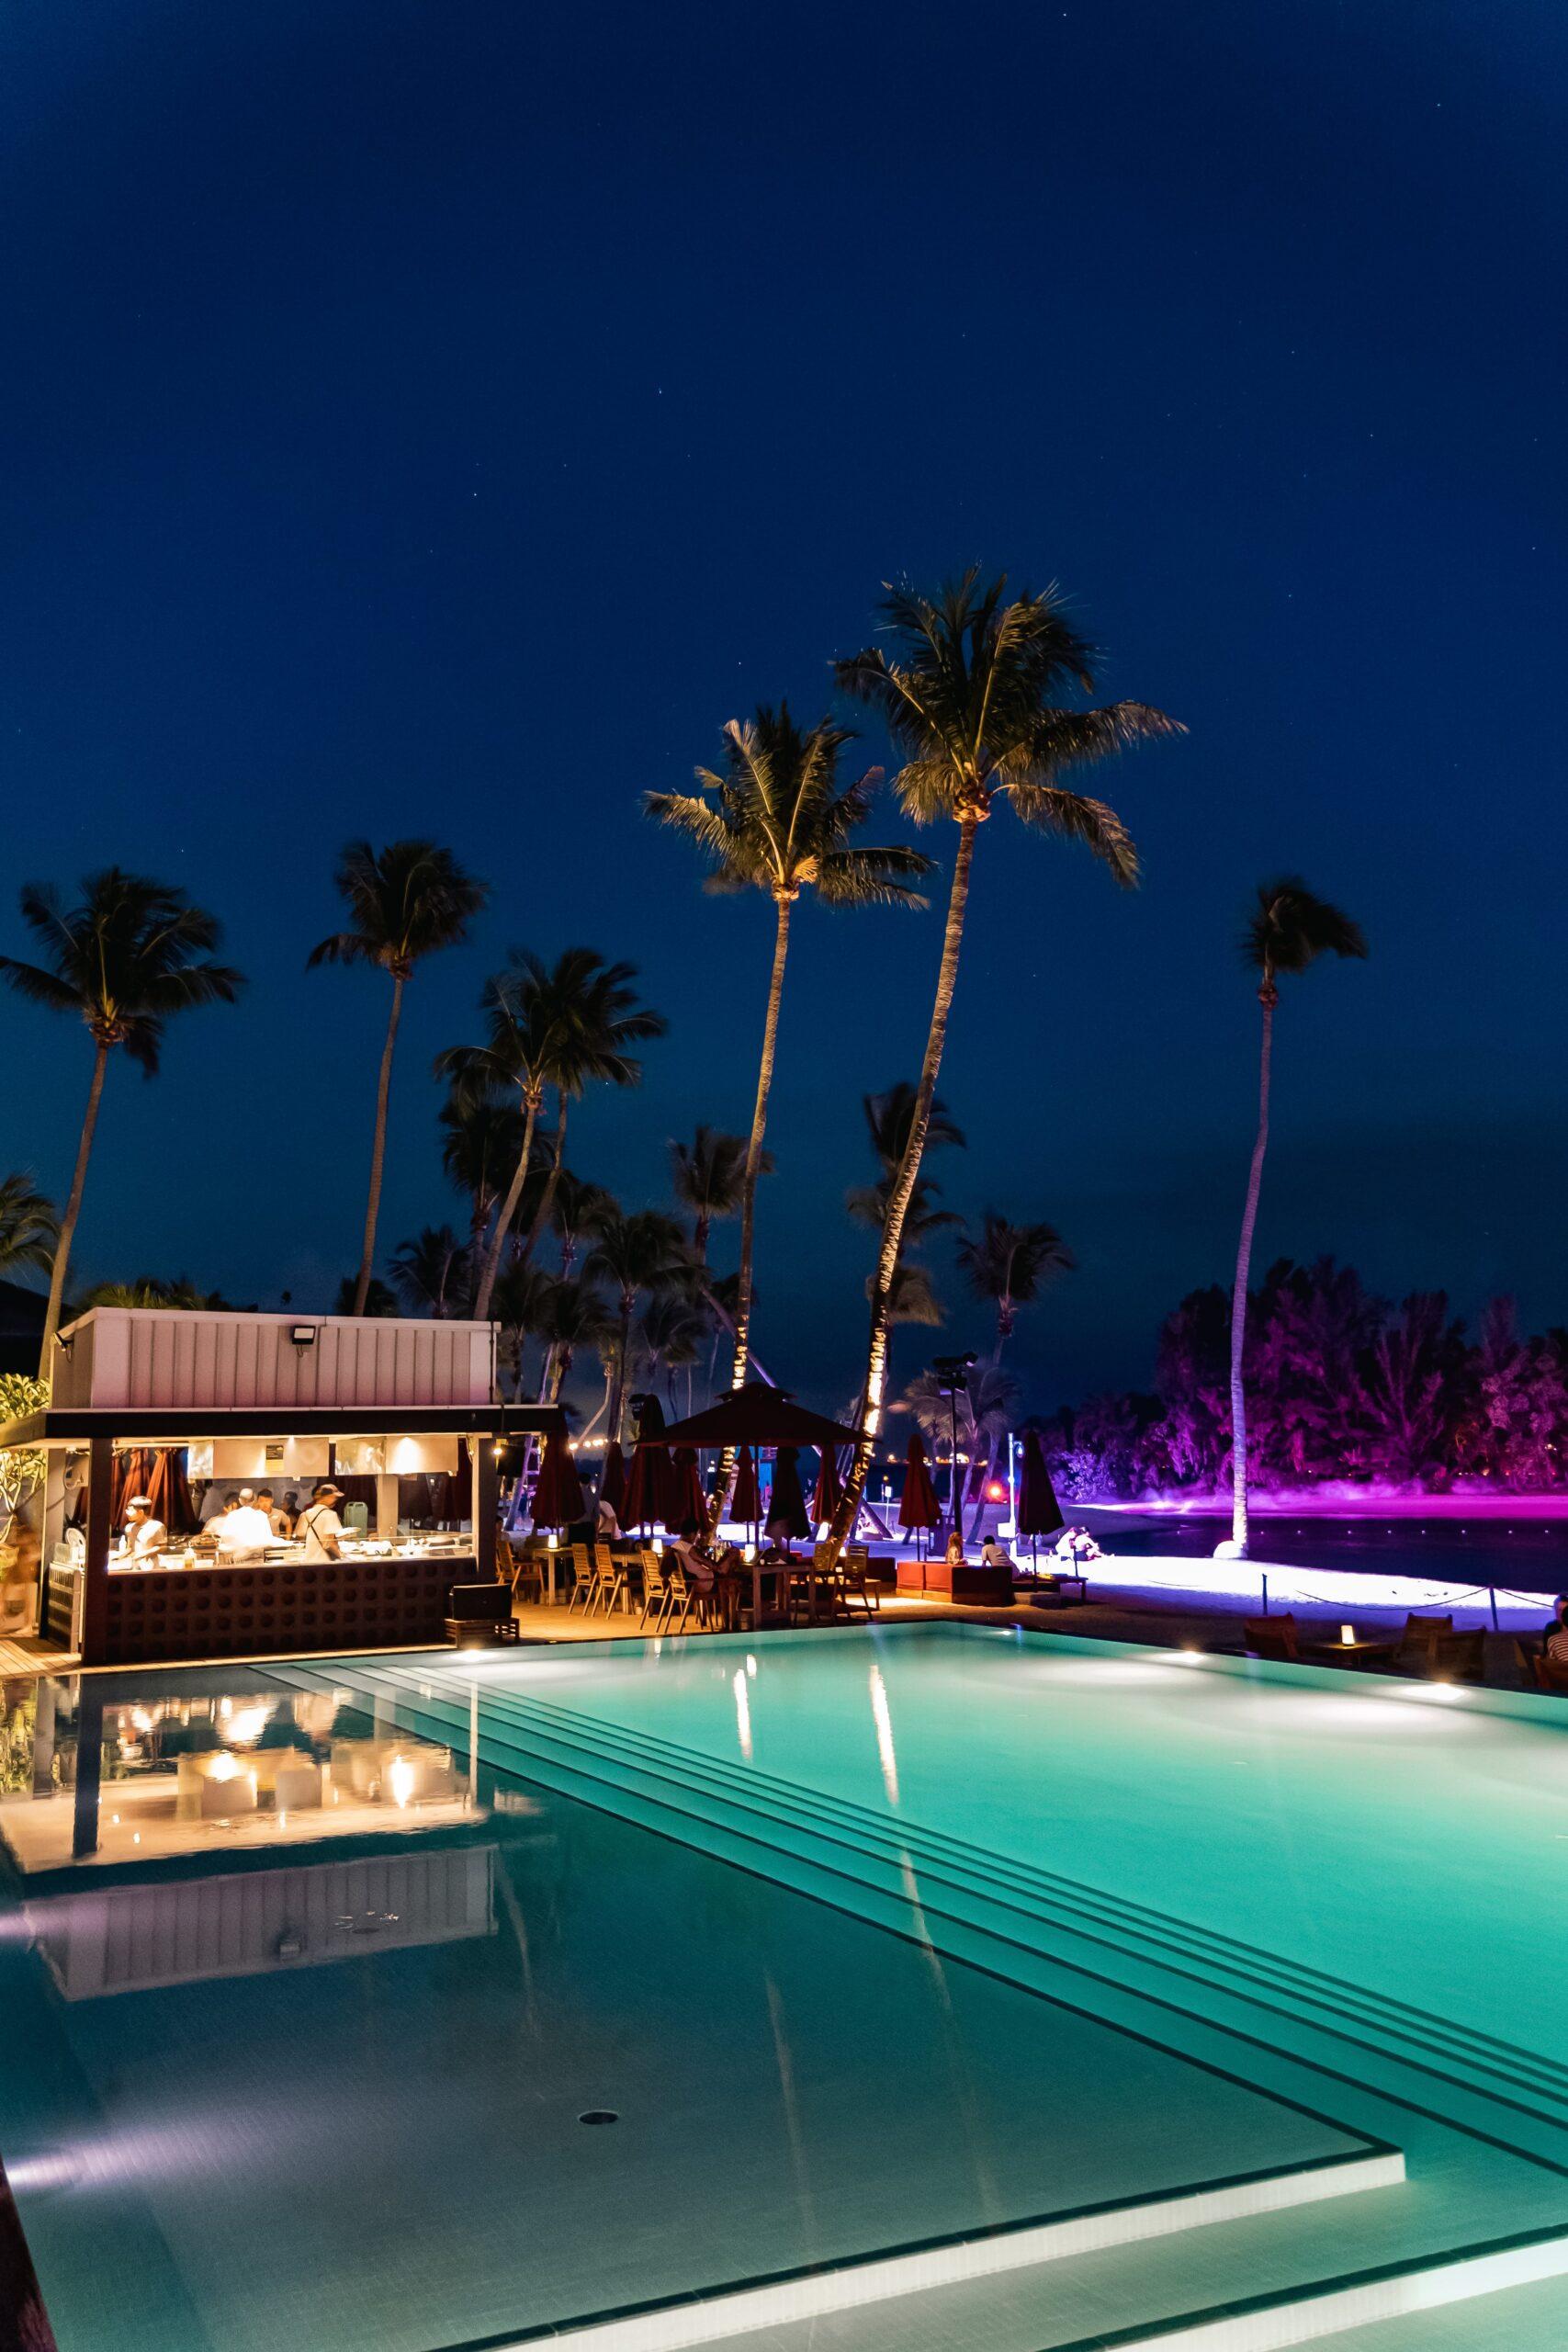 Image of a club at night with a swim up bar